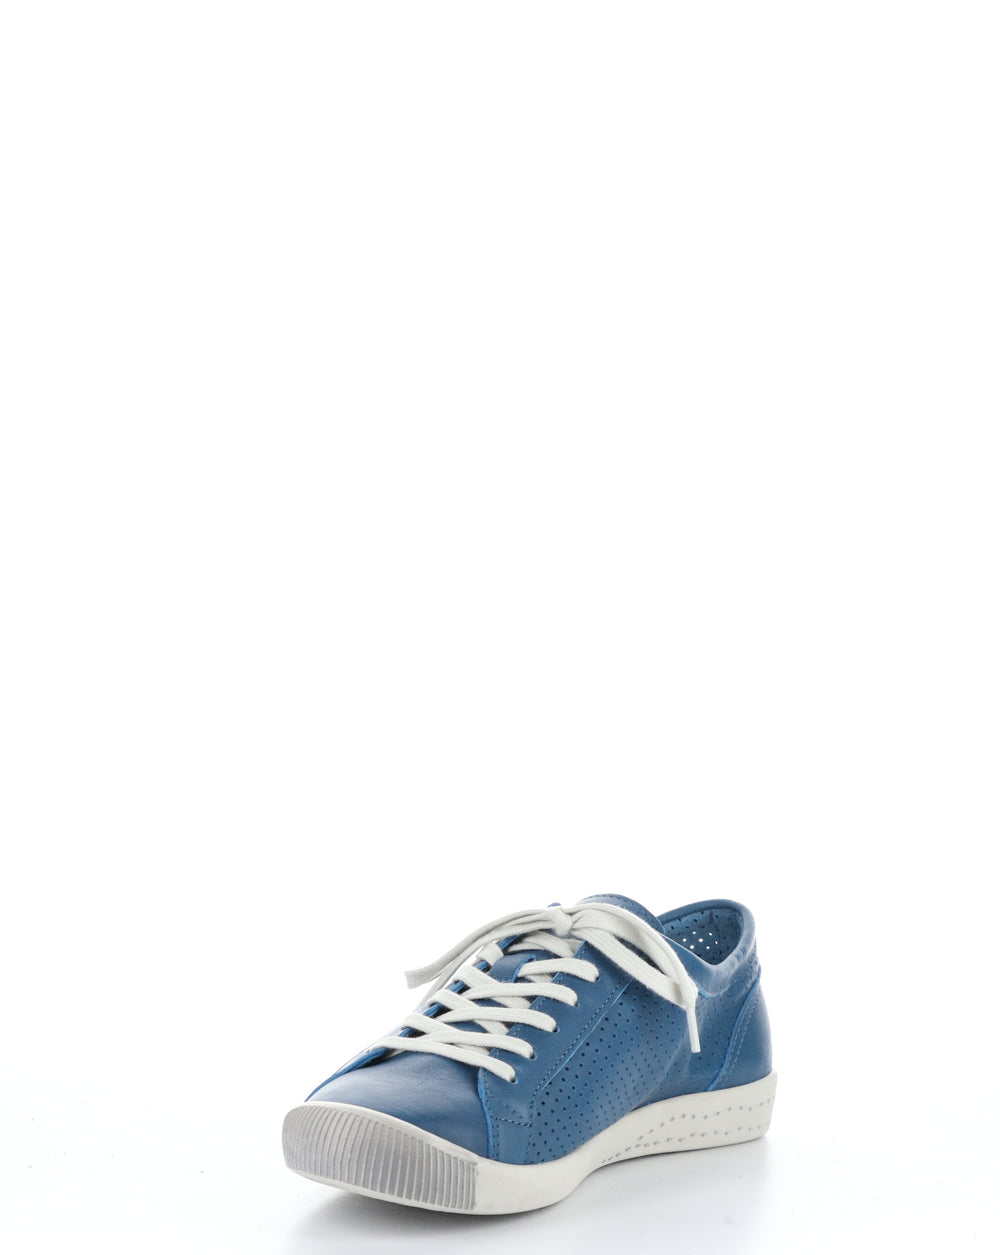 ICA388SOF BLUE Lace-up Shoes